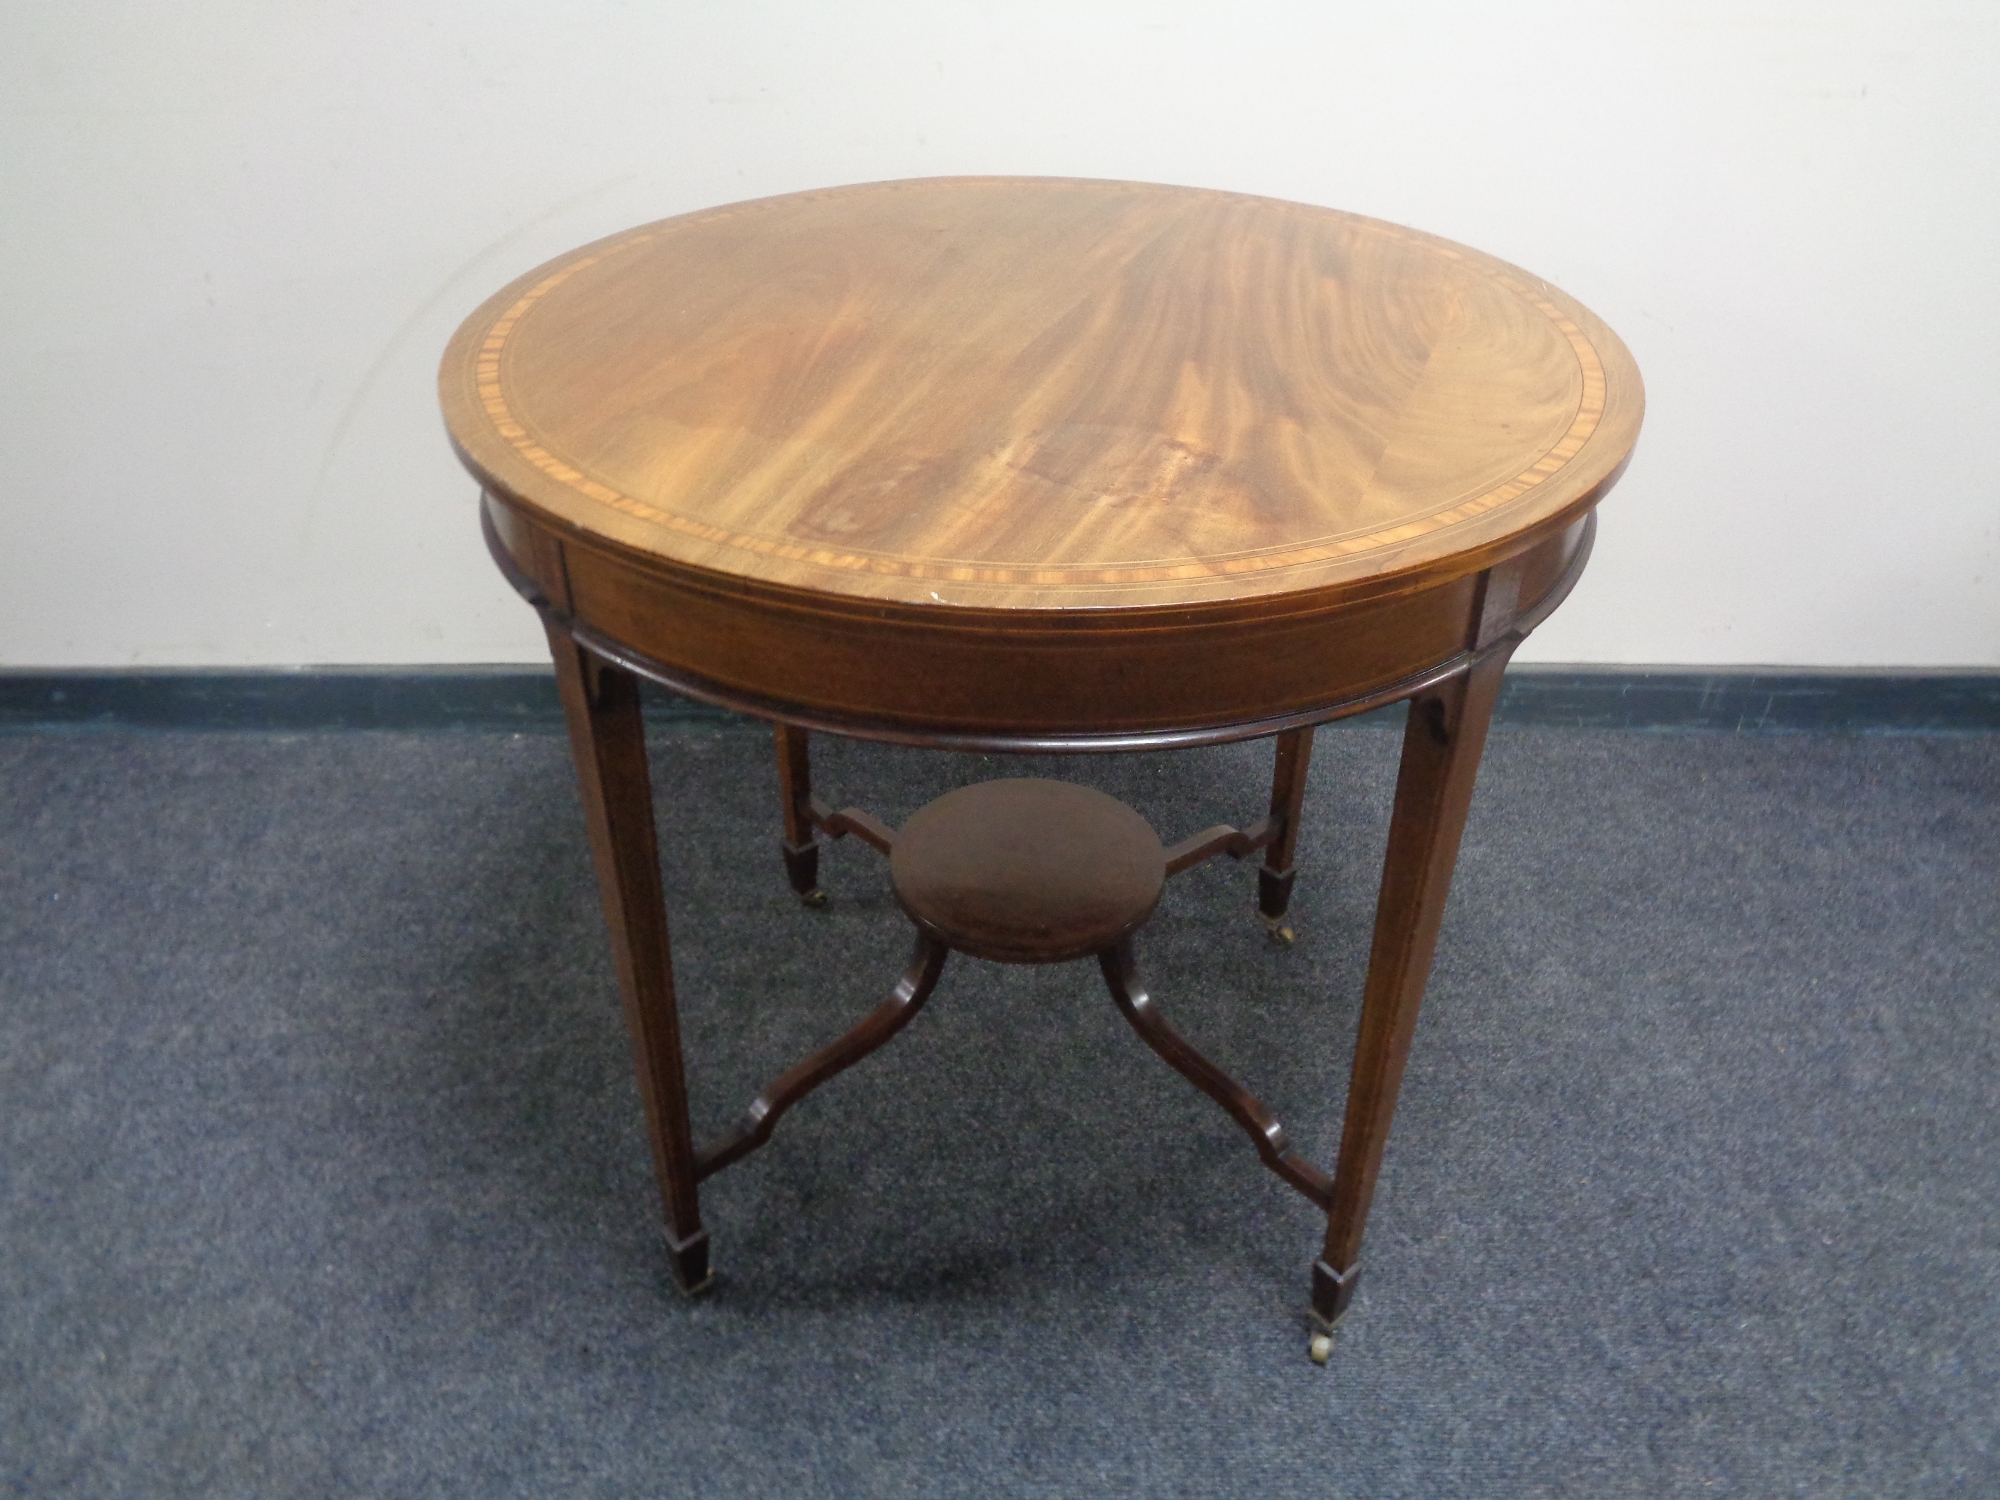 A 19th century circular mahogany occasional table with satinwood inlay